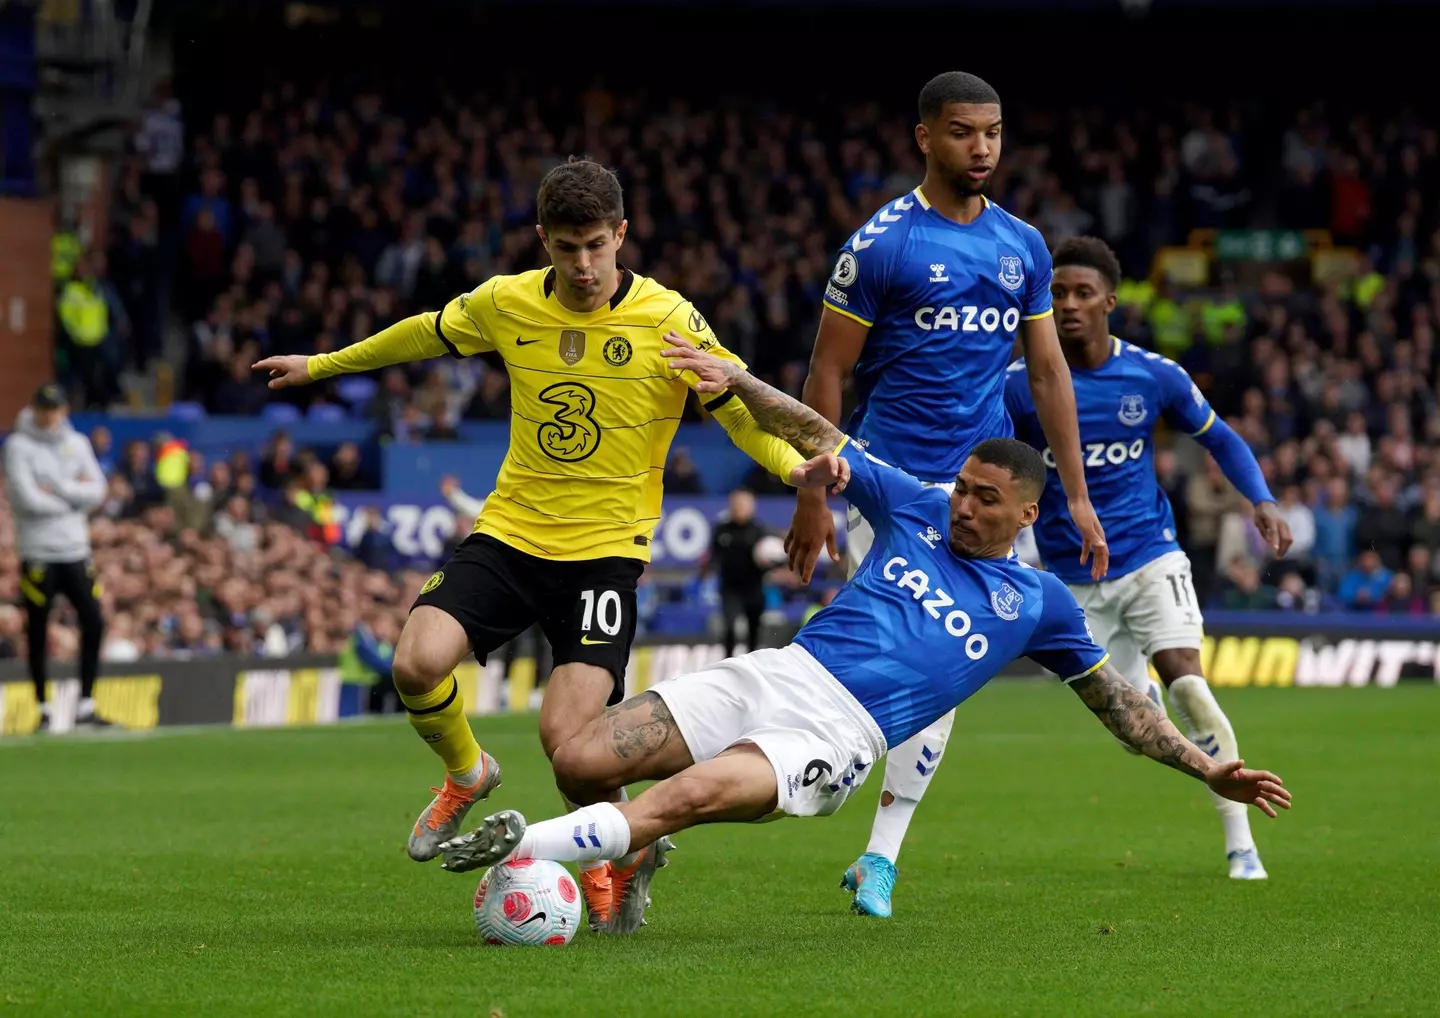 Pulisic in action vs Everton. (Image